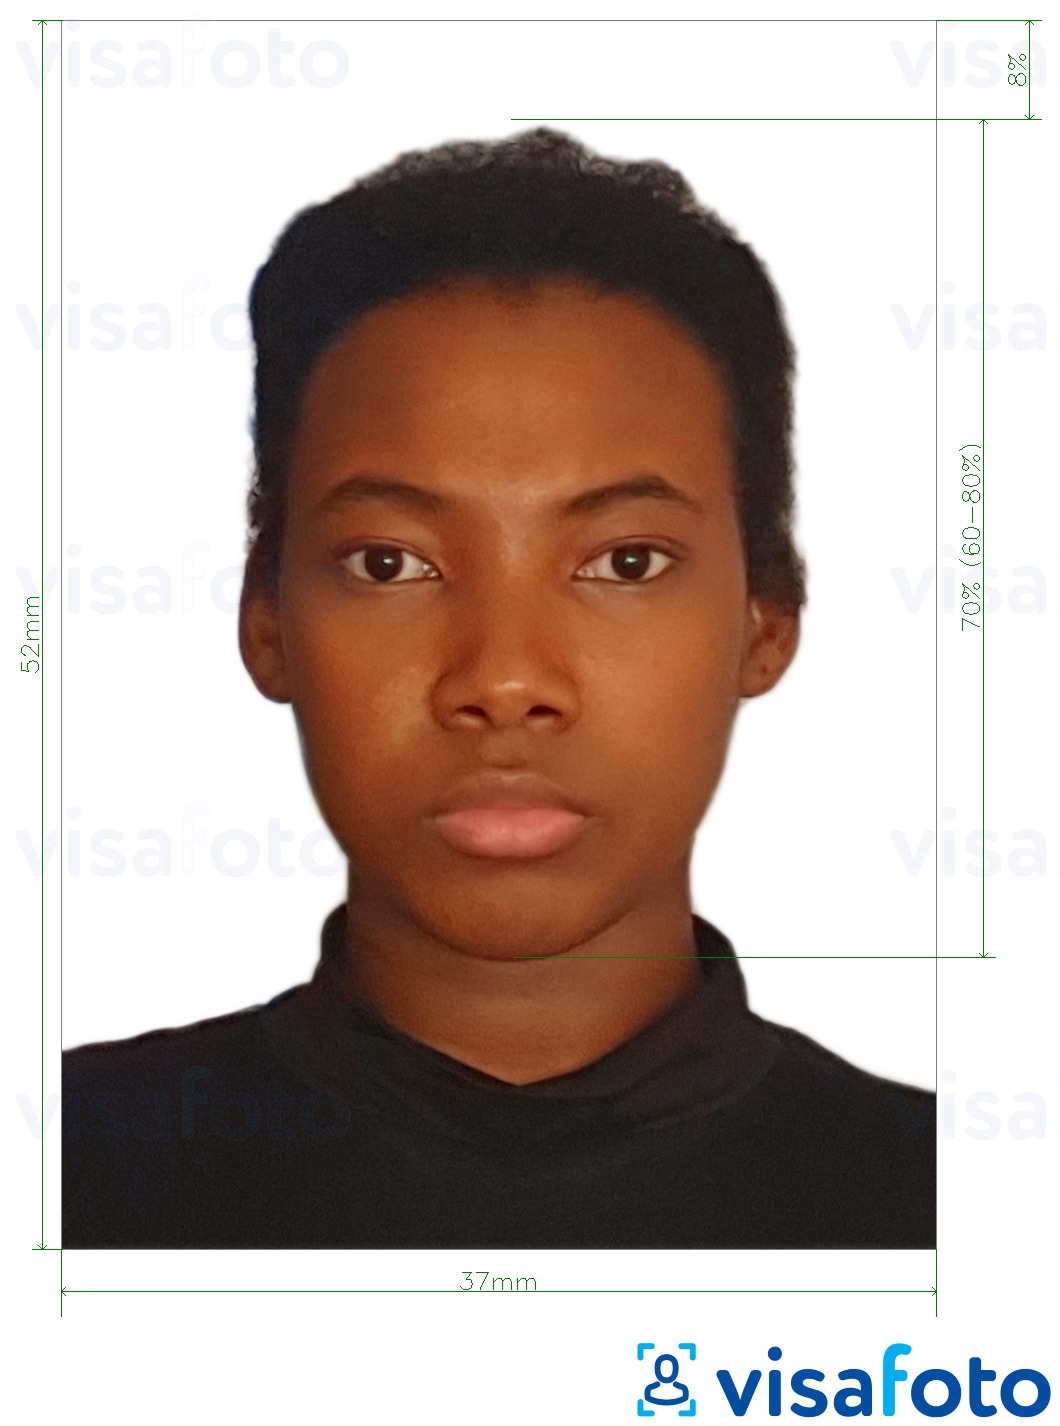 Example of photo for Namibia passport 37x52mm (3.7x5.2 cm) with exact size specification